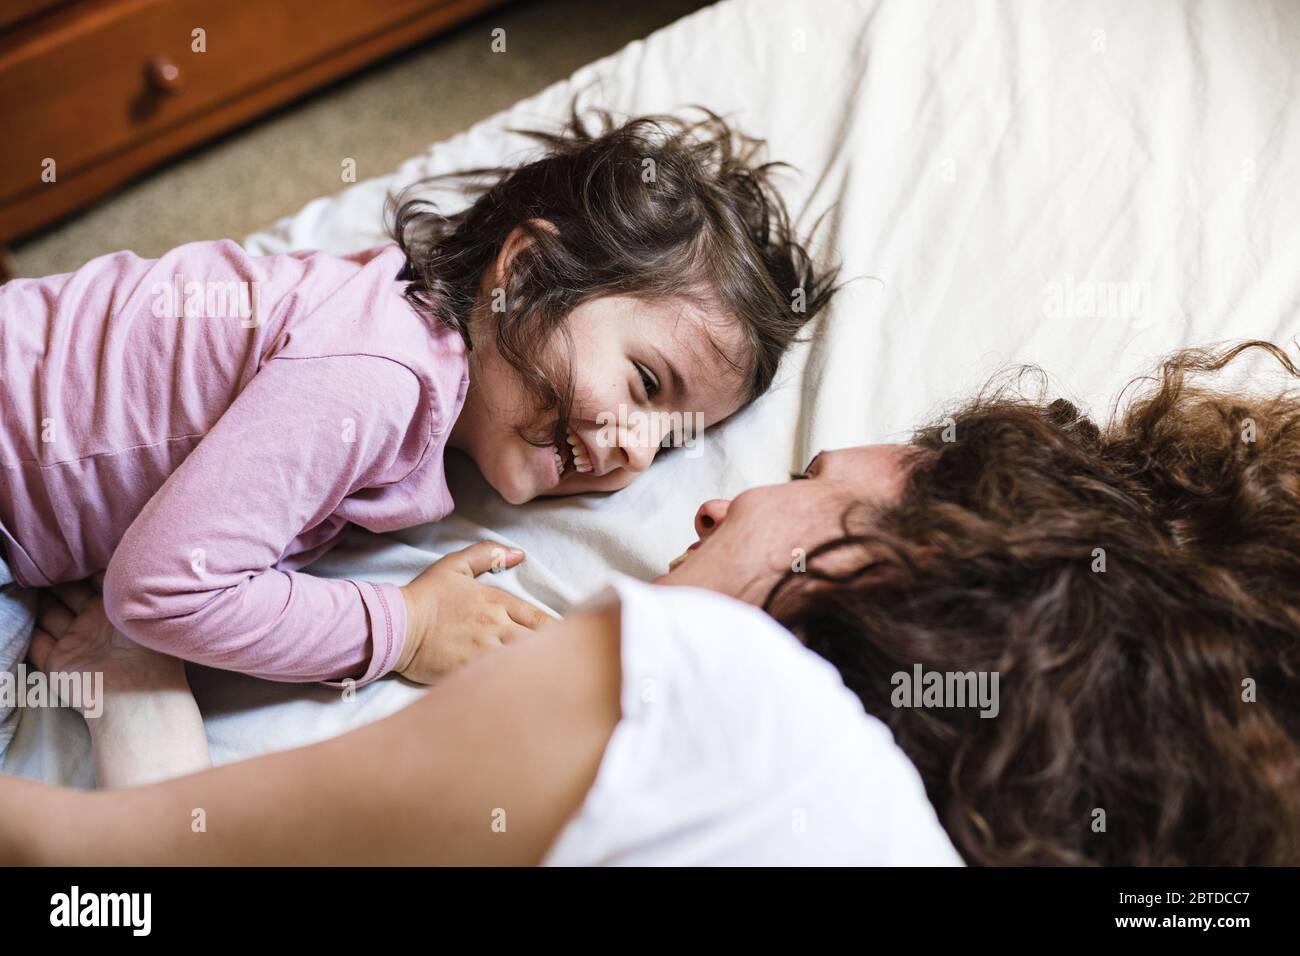 A little girl lying down in her mother's bed laughs while they have a great time playing around Stock Photo